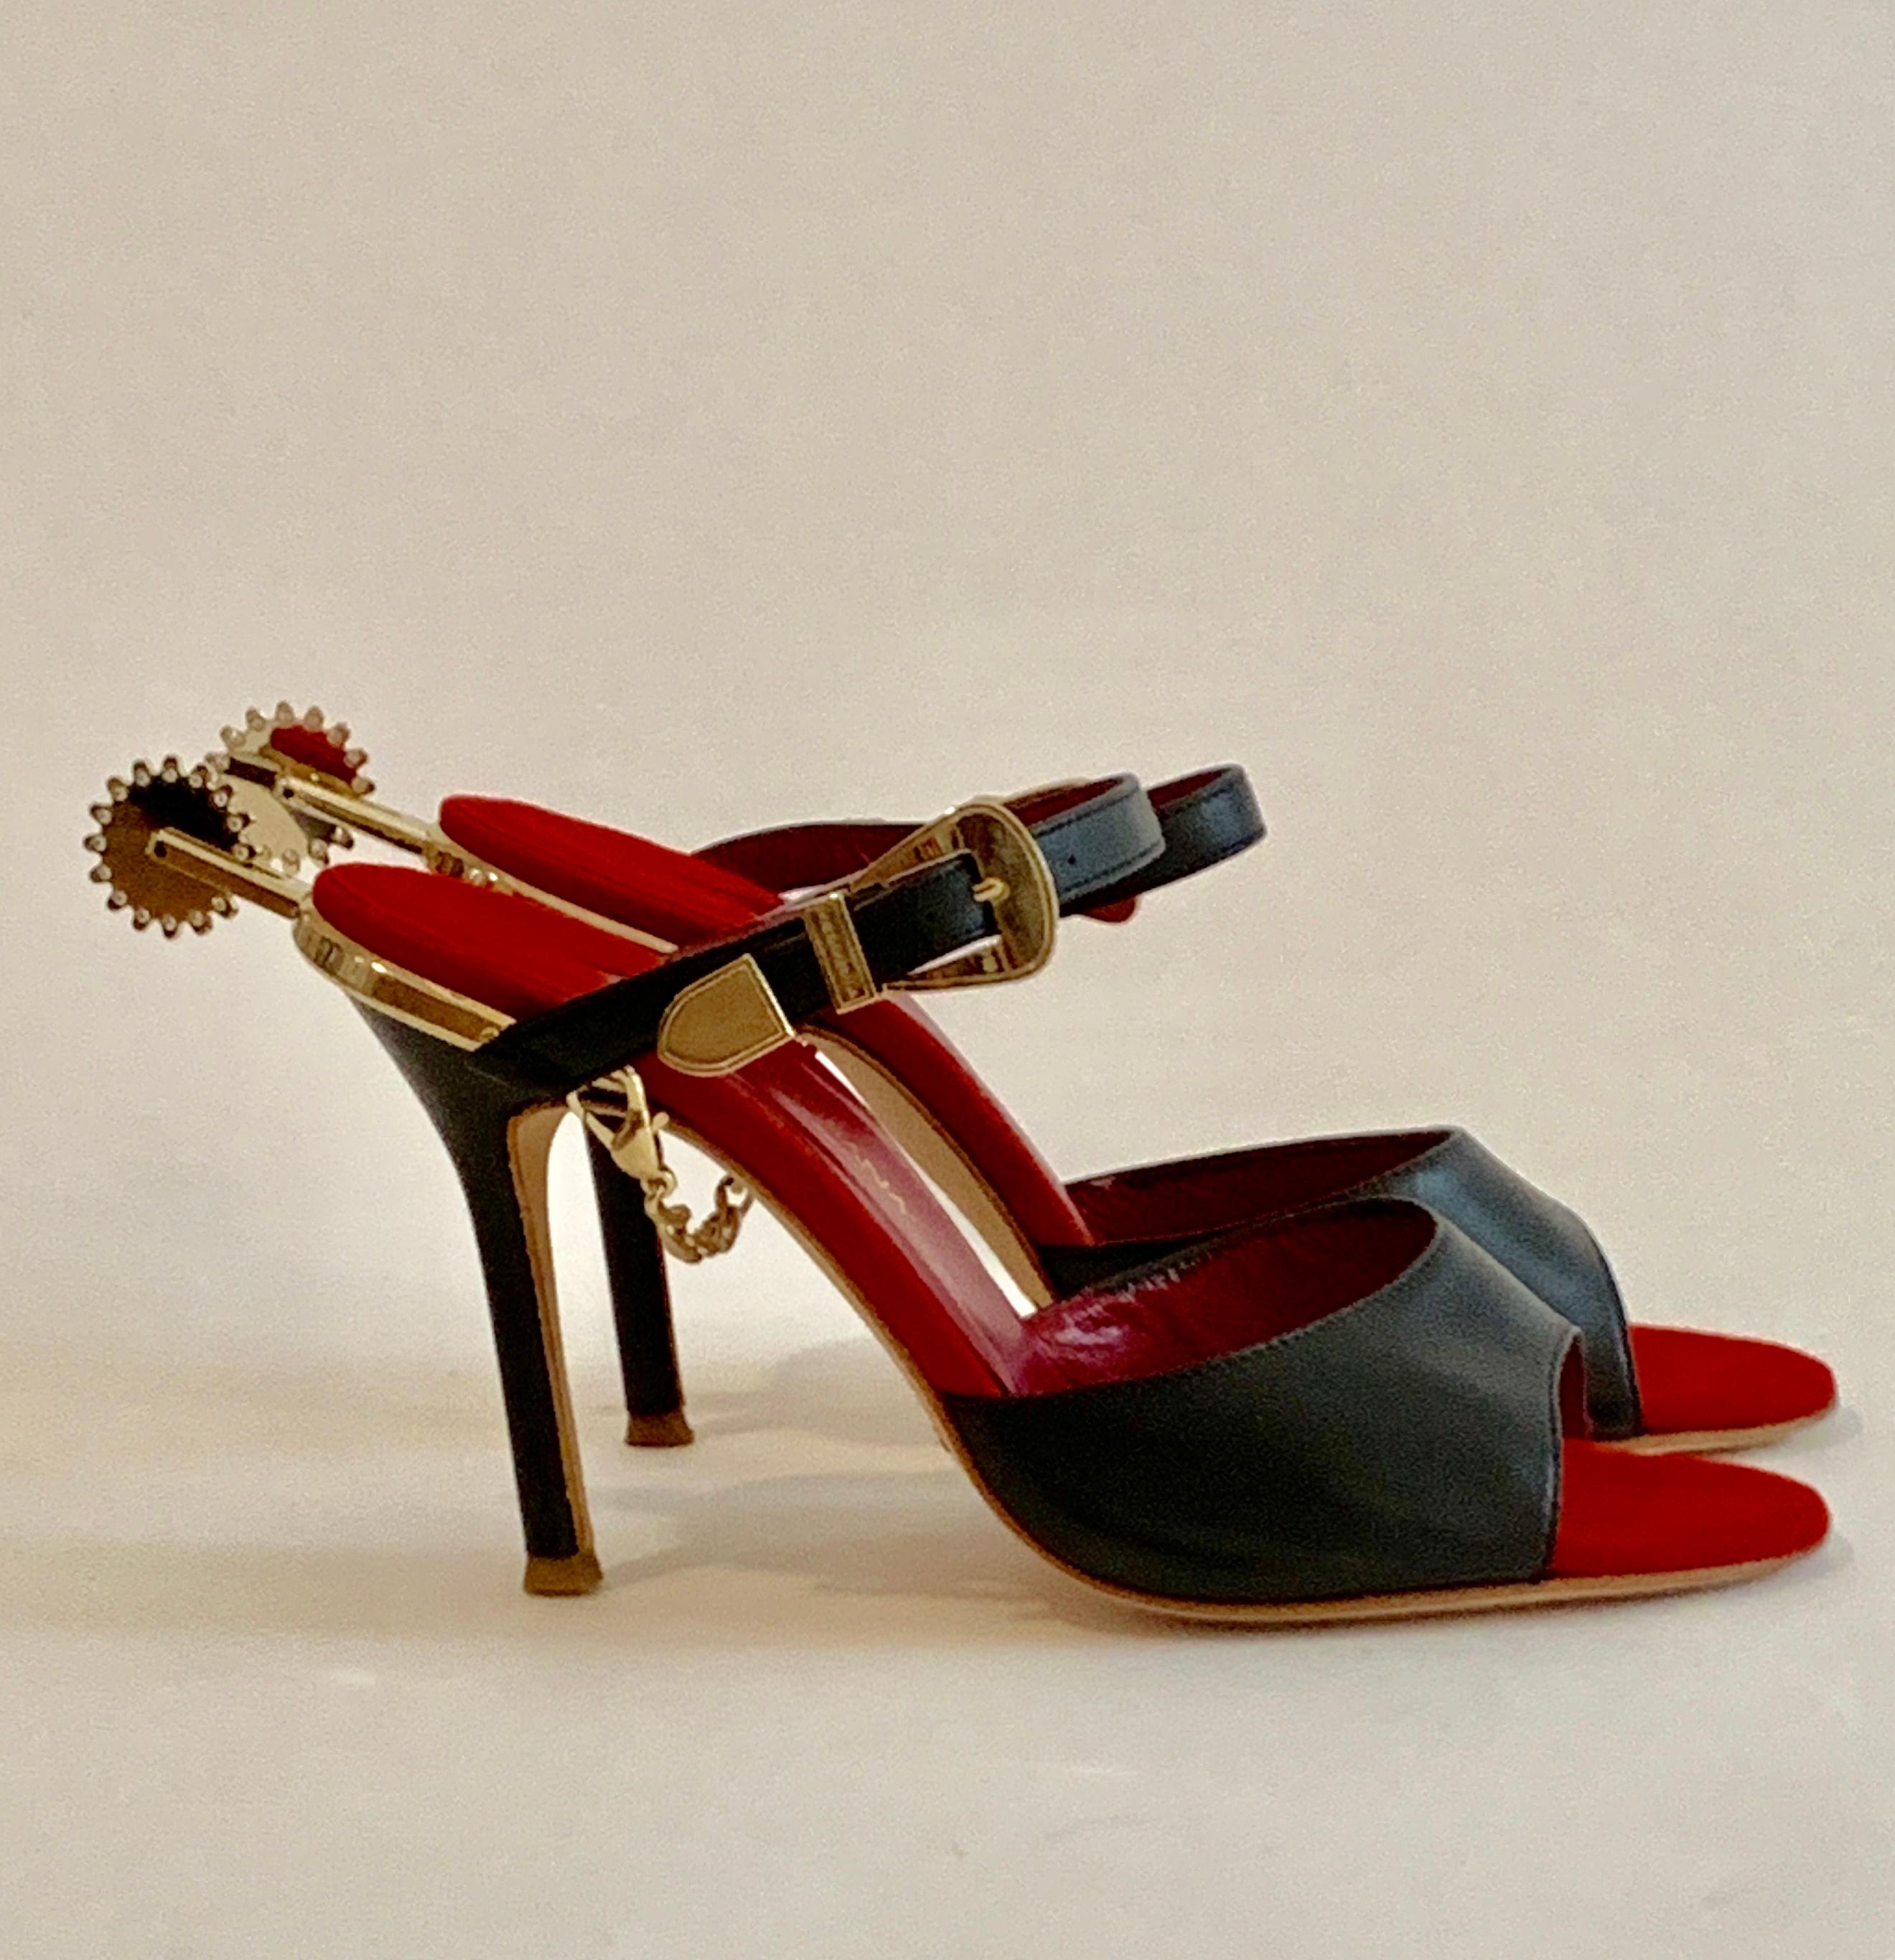 Amazing Western inspired Dolce & Gabbana black leather high heeled sandals with goldstone buckle, chain, and rhinestone accented spur detailing. Red suede insole. Slides on. Approximate 3.25